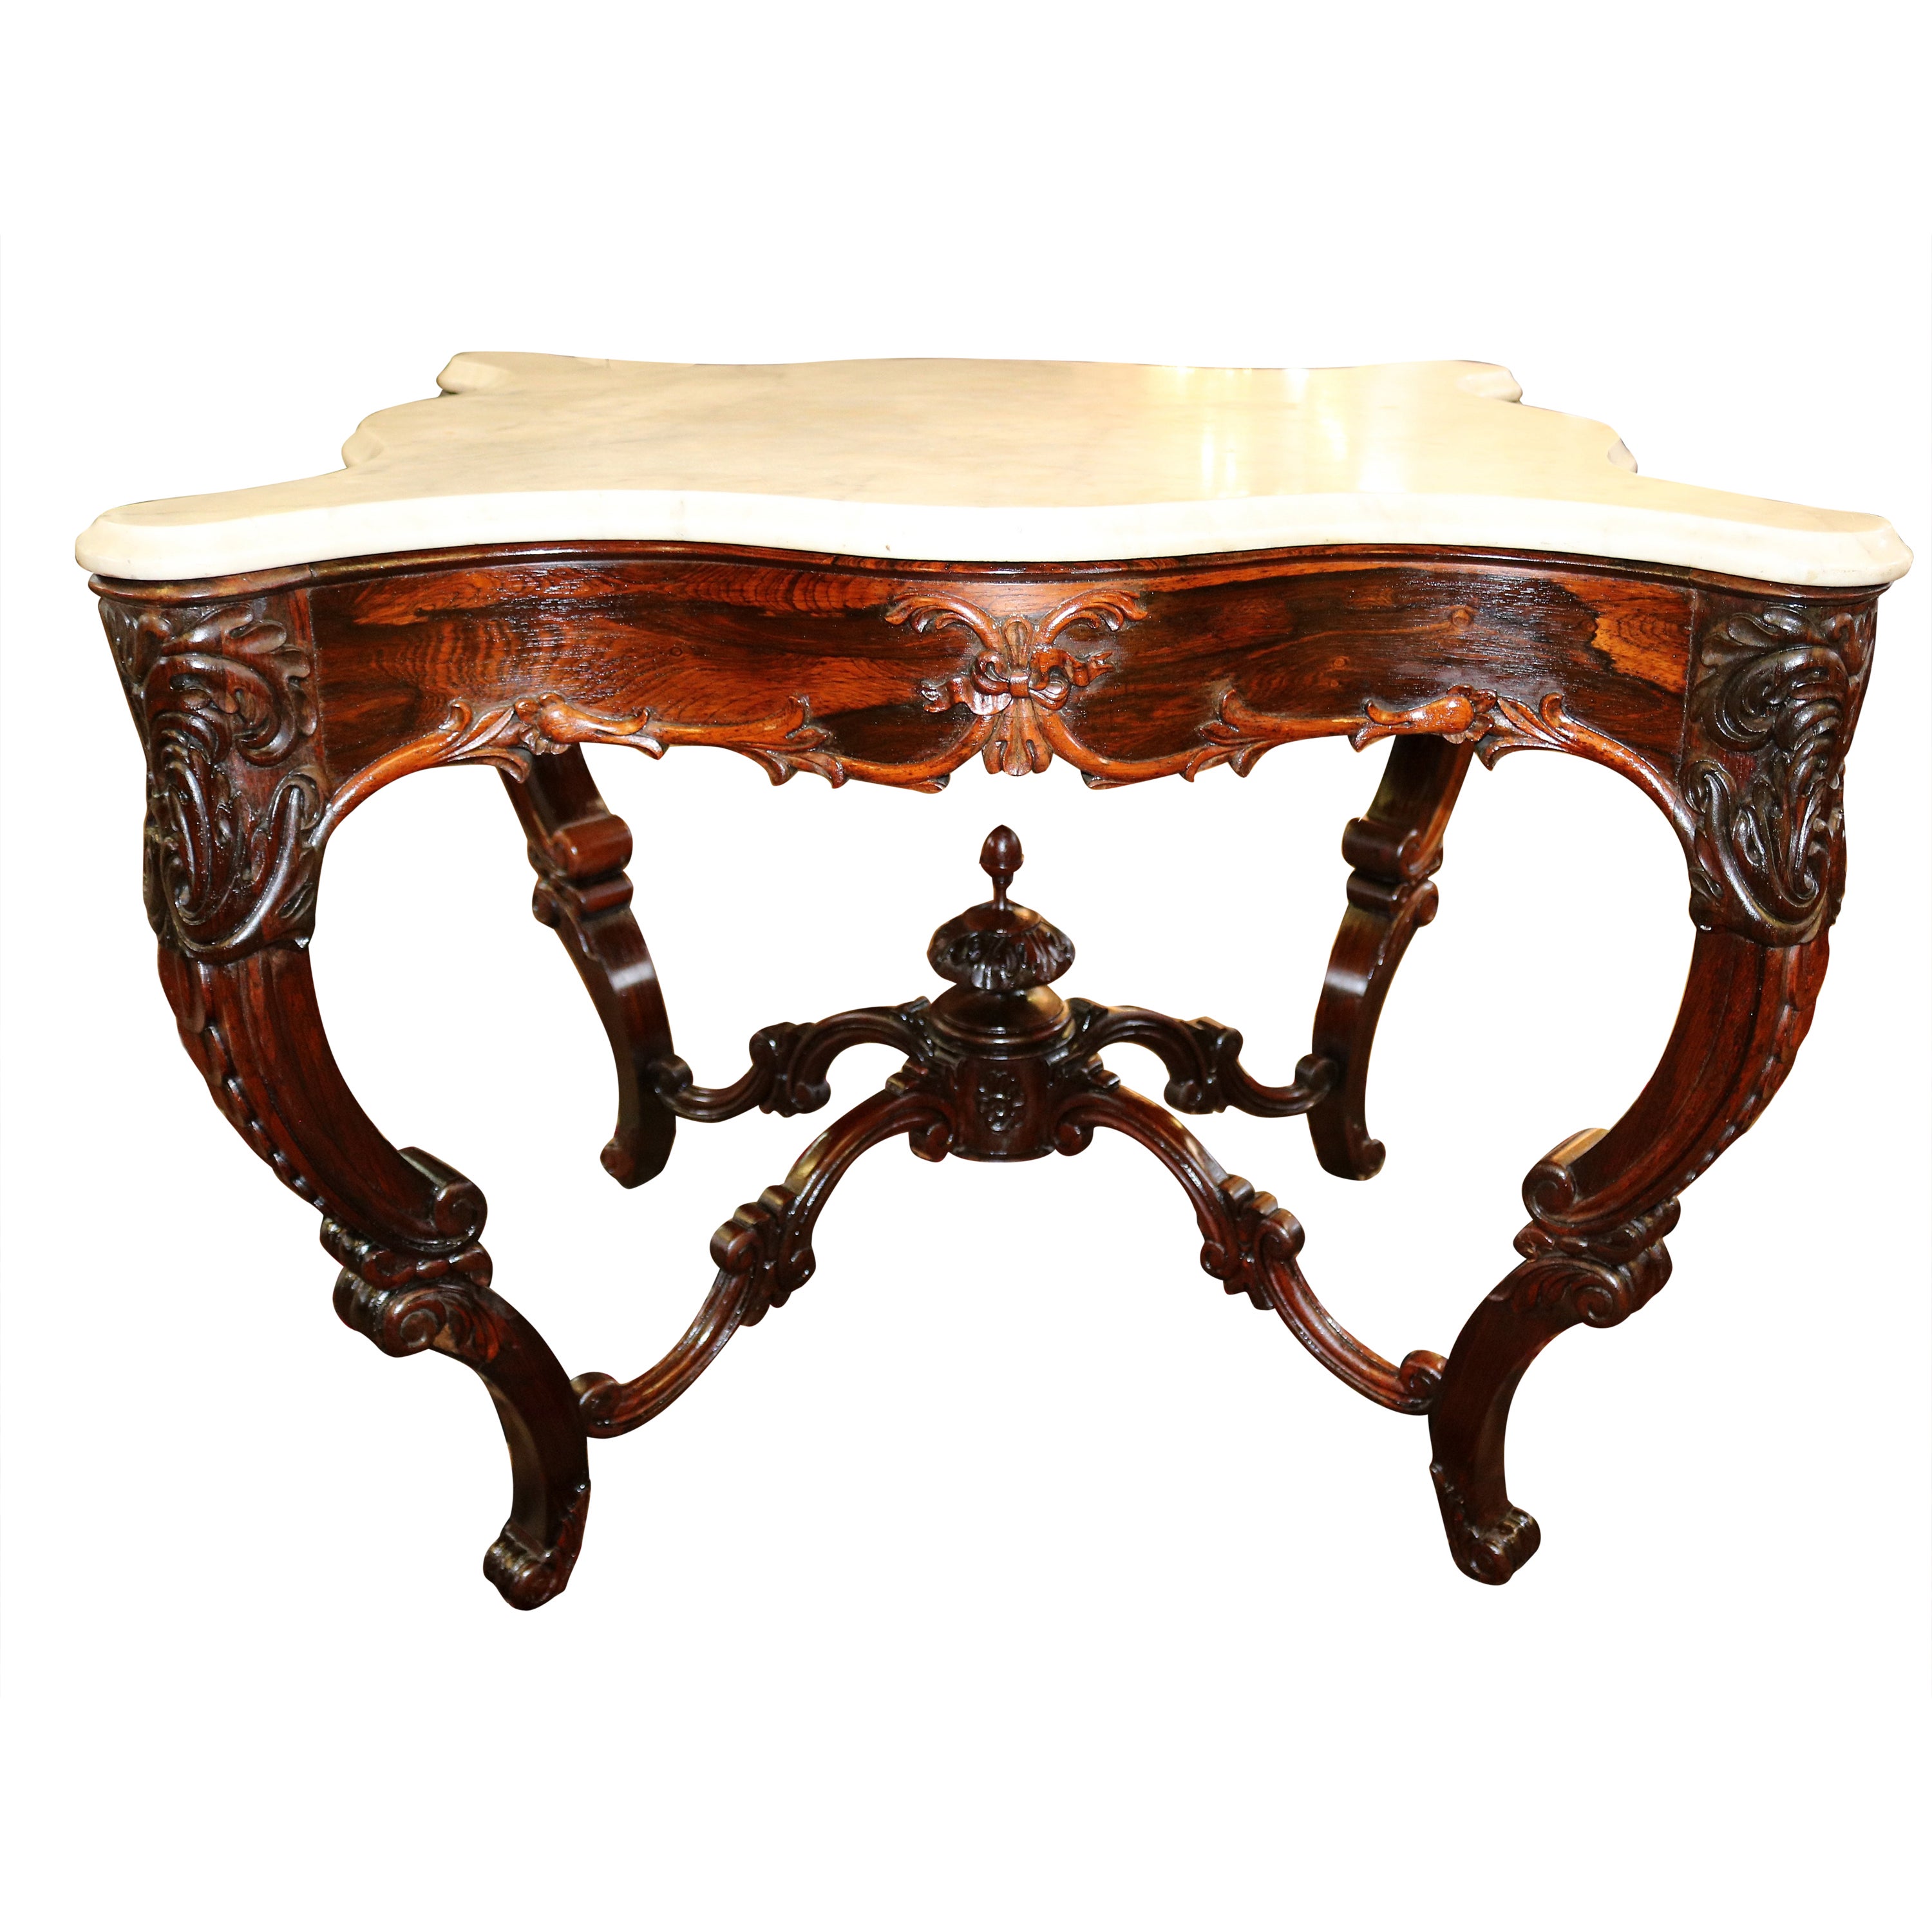 Victorian Rosewood White Marble Top Occasional Center Table Attr to J.W Meeks